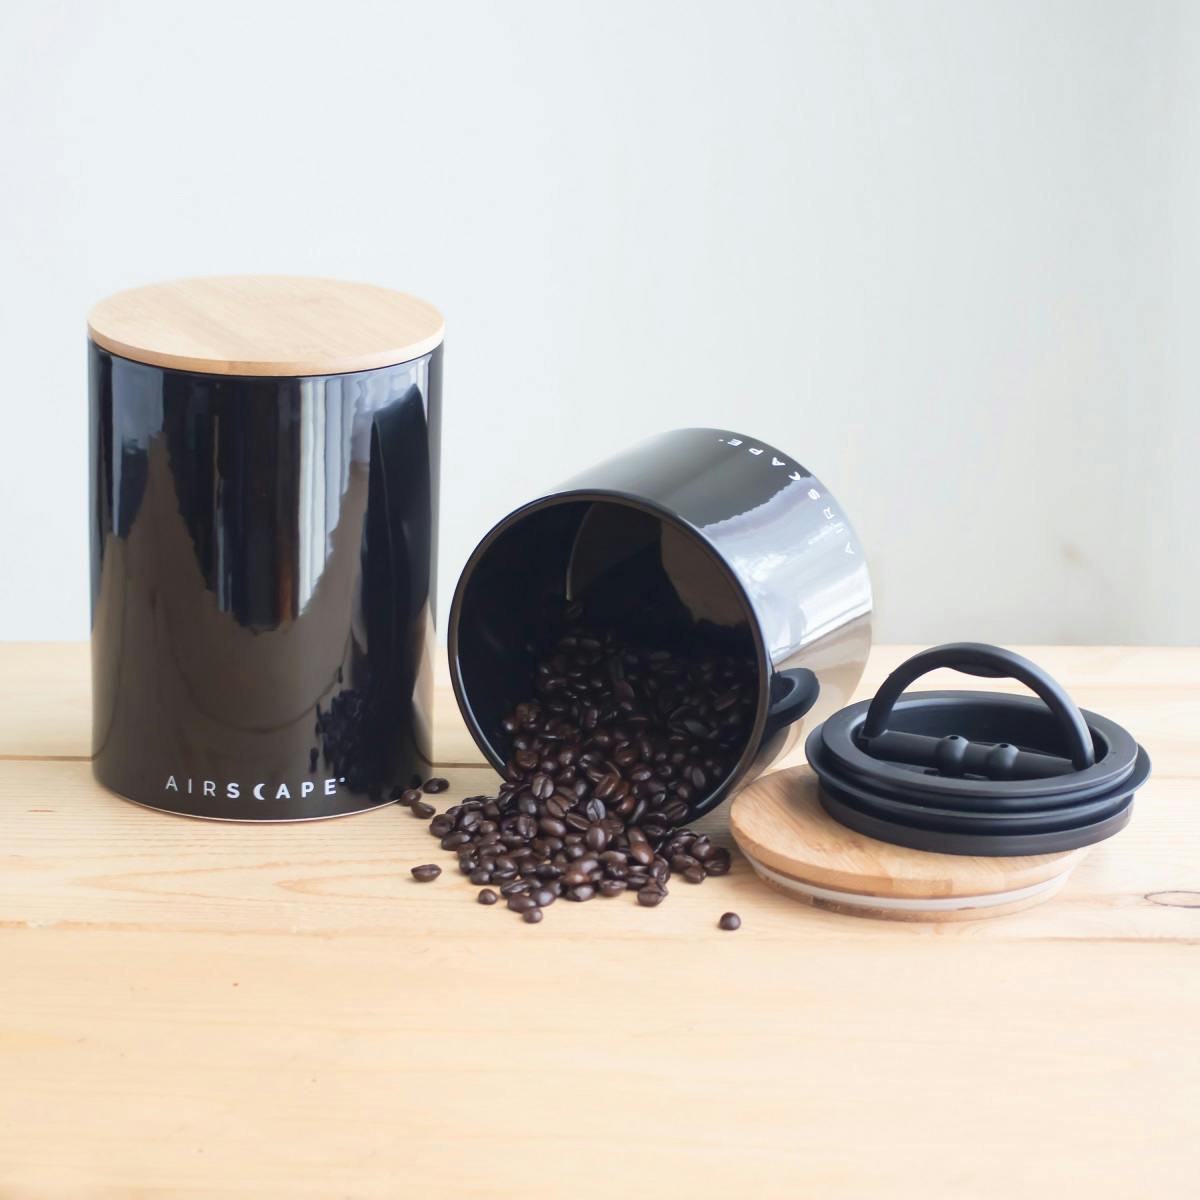 Airscape Ceramic Coffee Canister